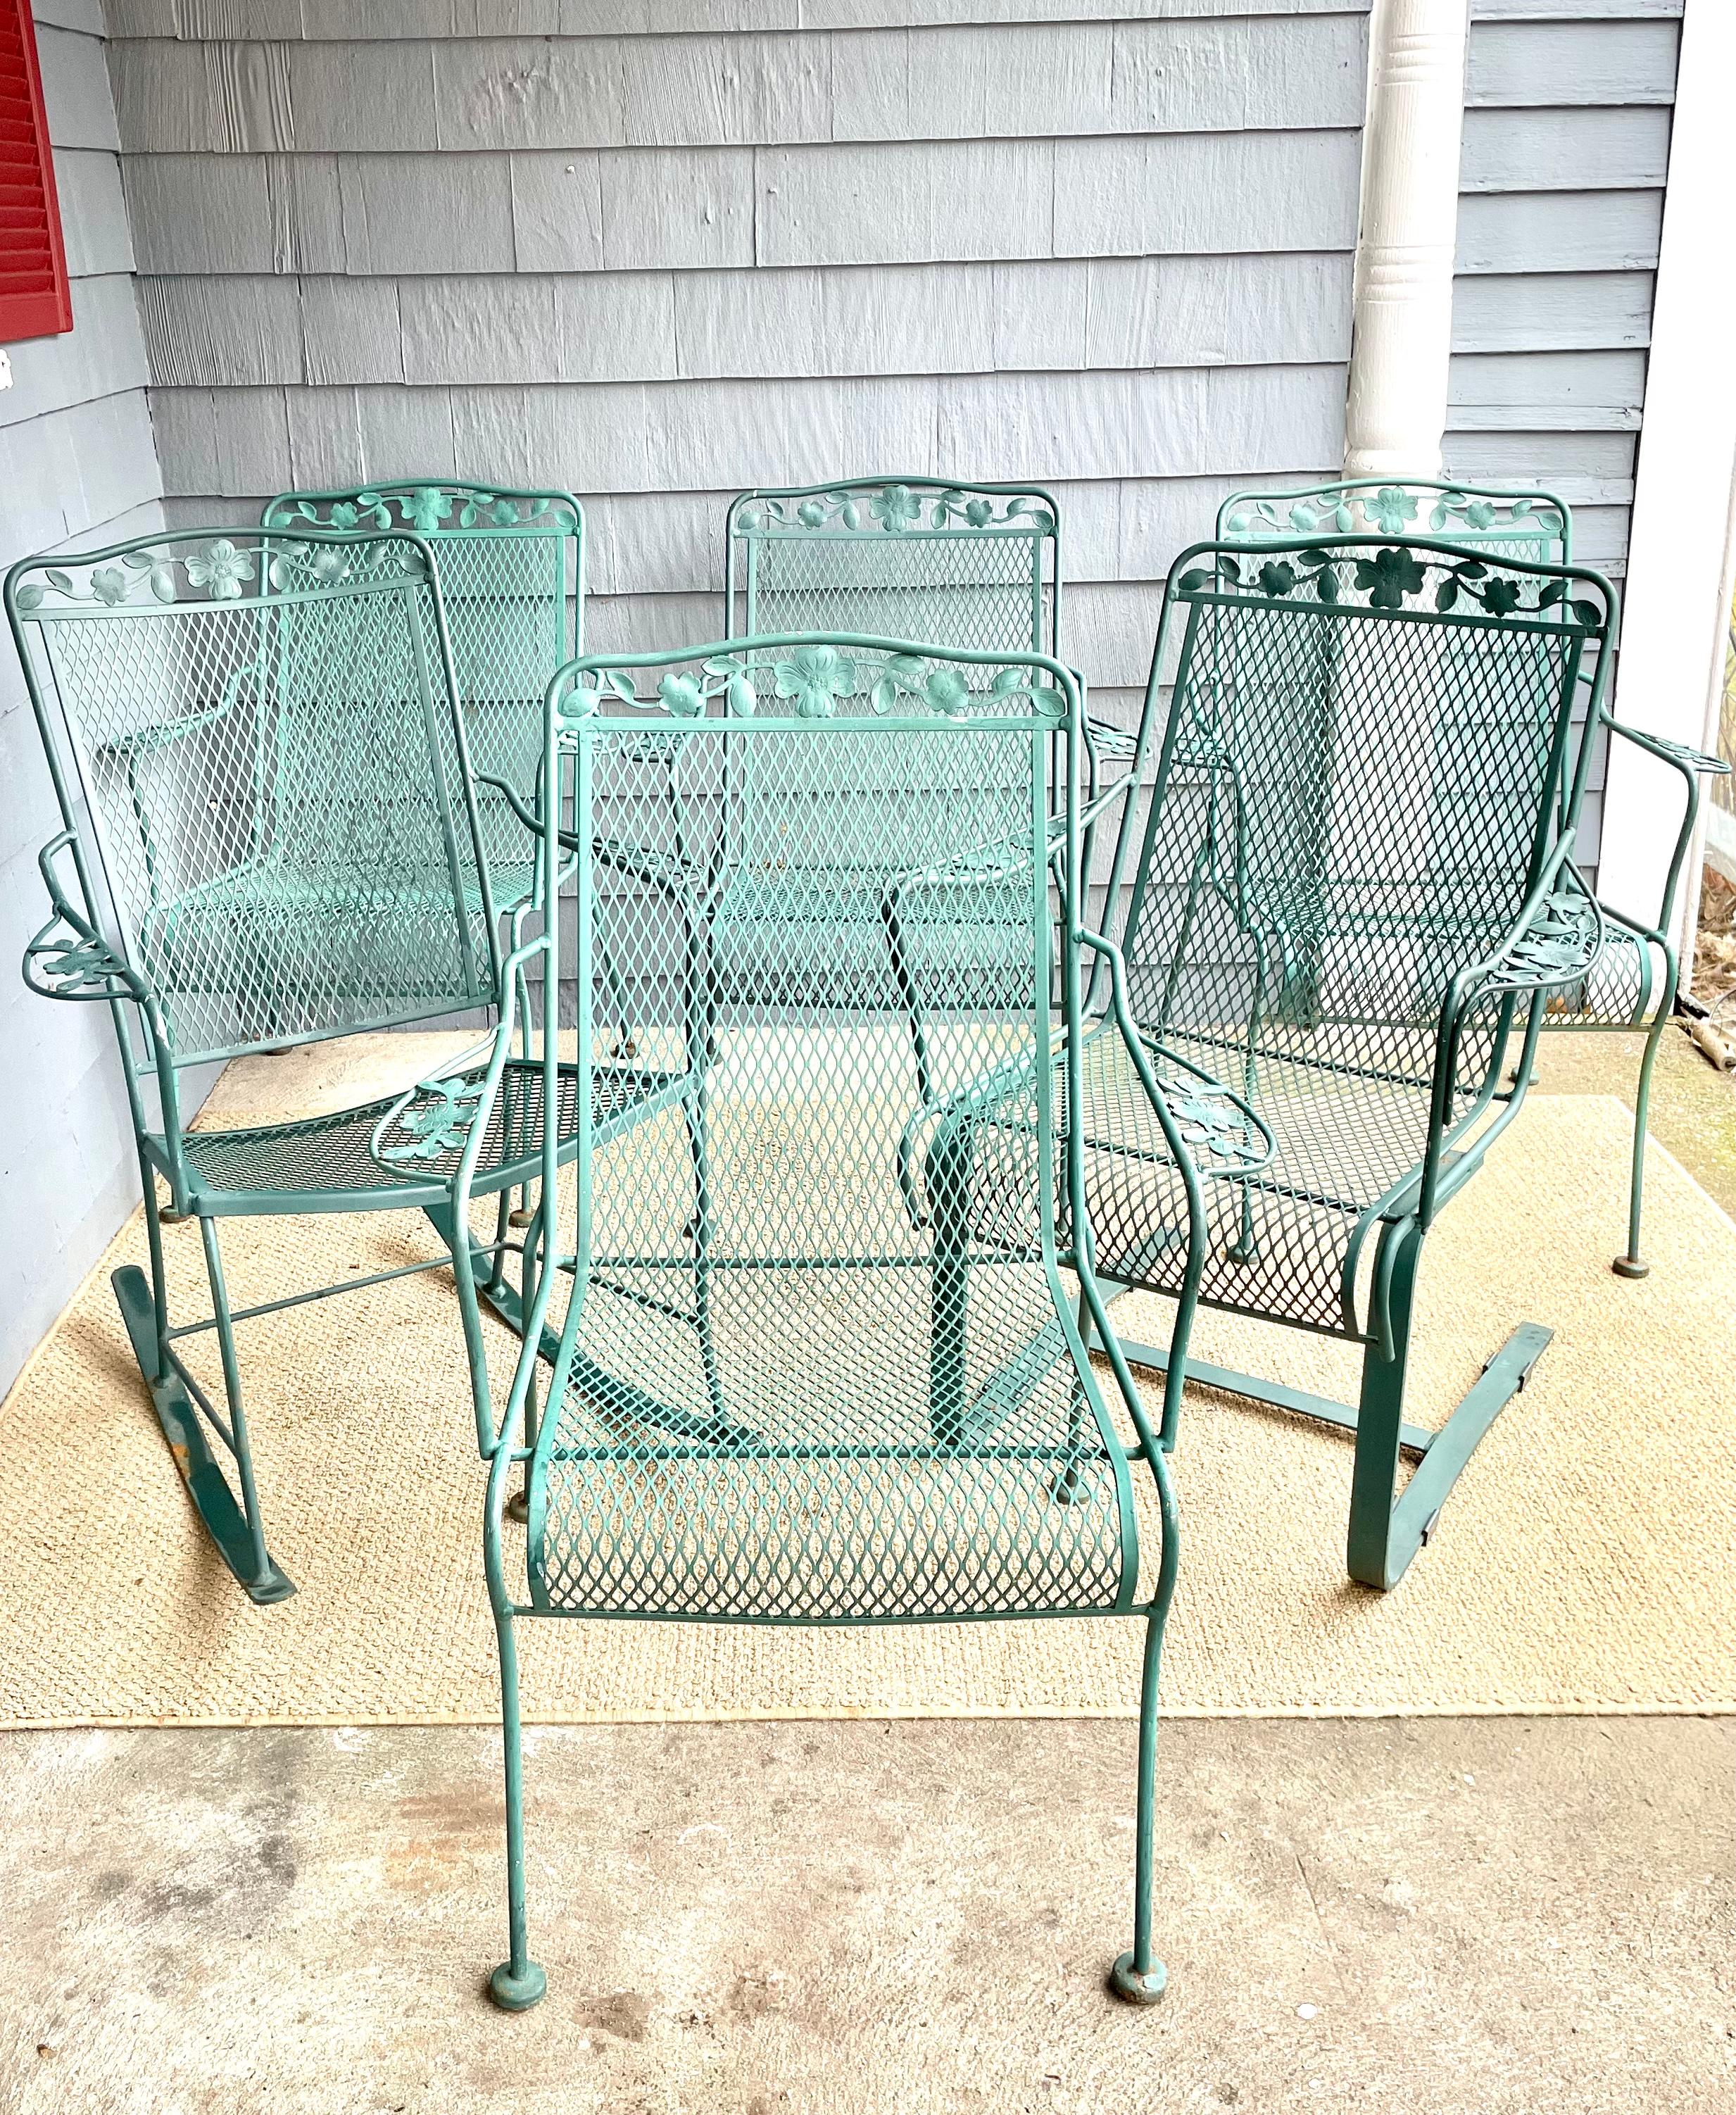 Available now for your enjoyment and ready to ship is a Set of 6 Vintage Wrought Iron Patio Chairs including an Outdoor Patio Rocker Arm Chair and Spring Chair. 

This lovely Wrought Iron Set of 6 Chairs are the perfect addition to any garden,